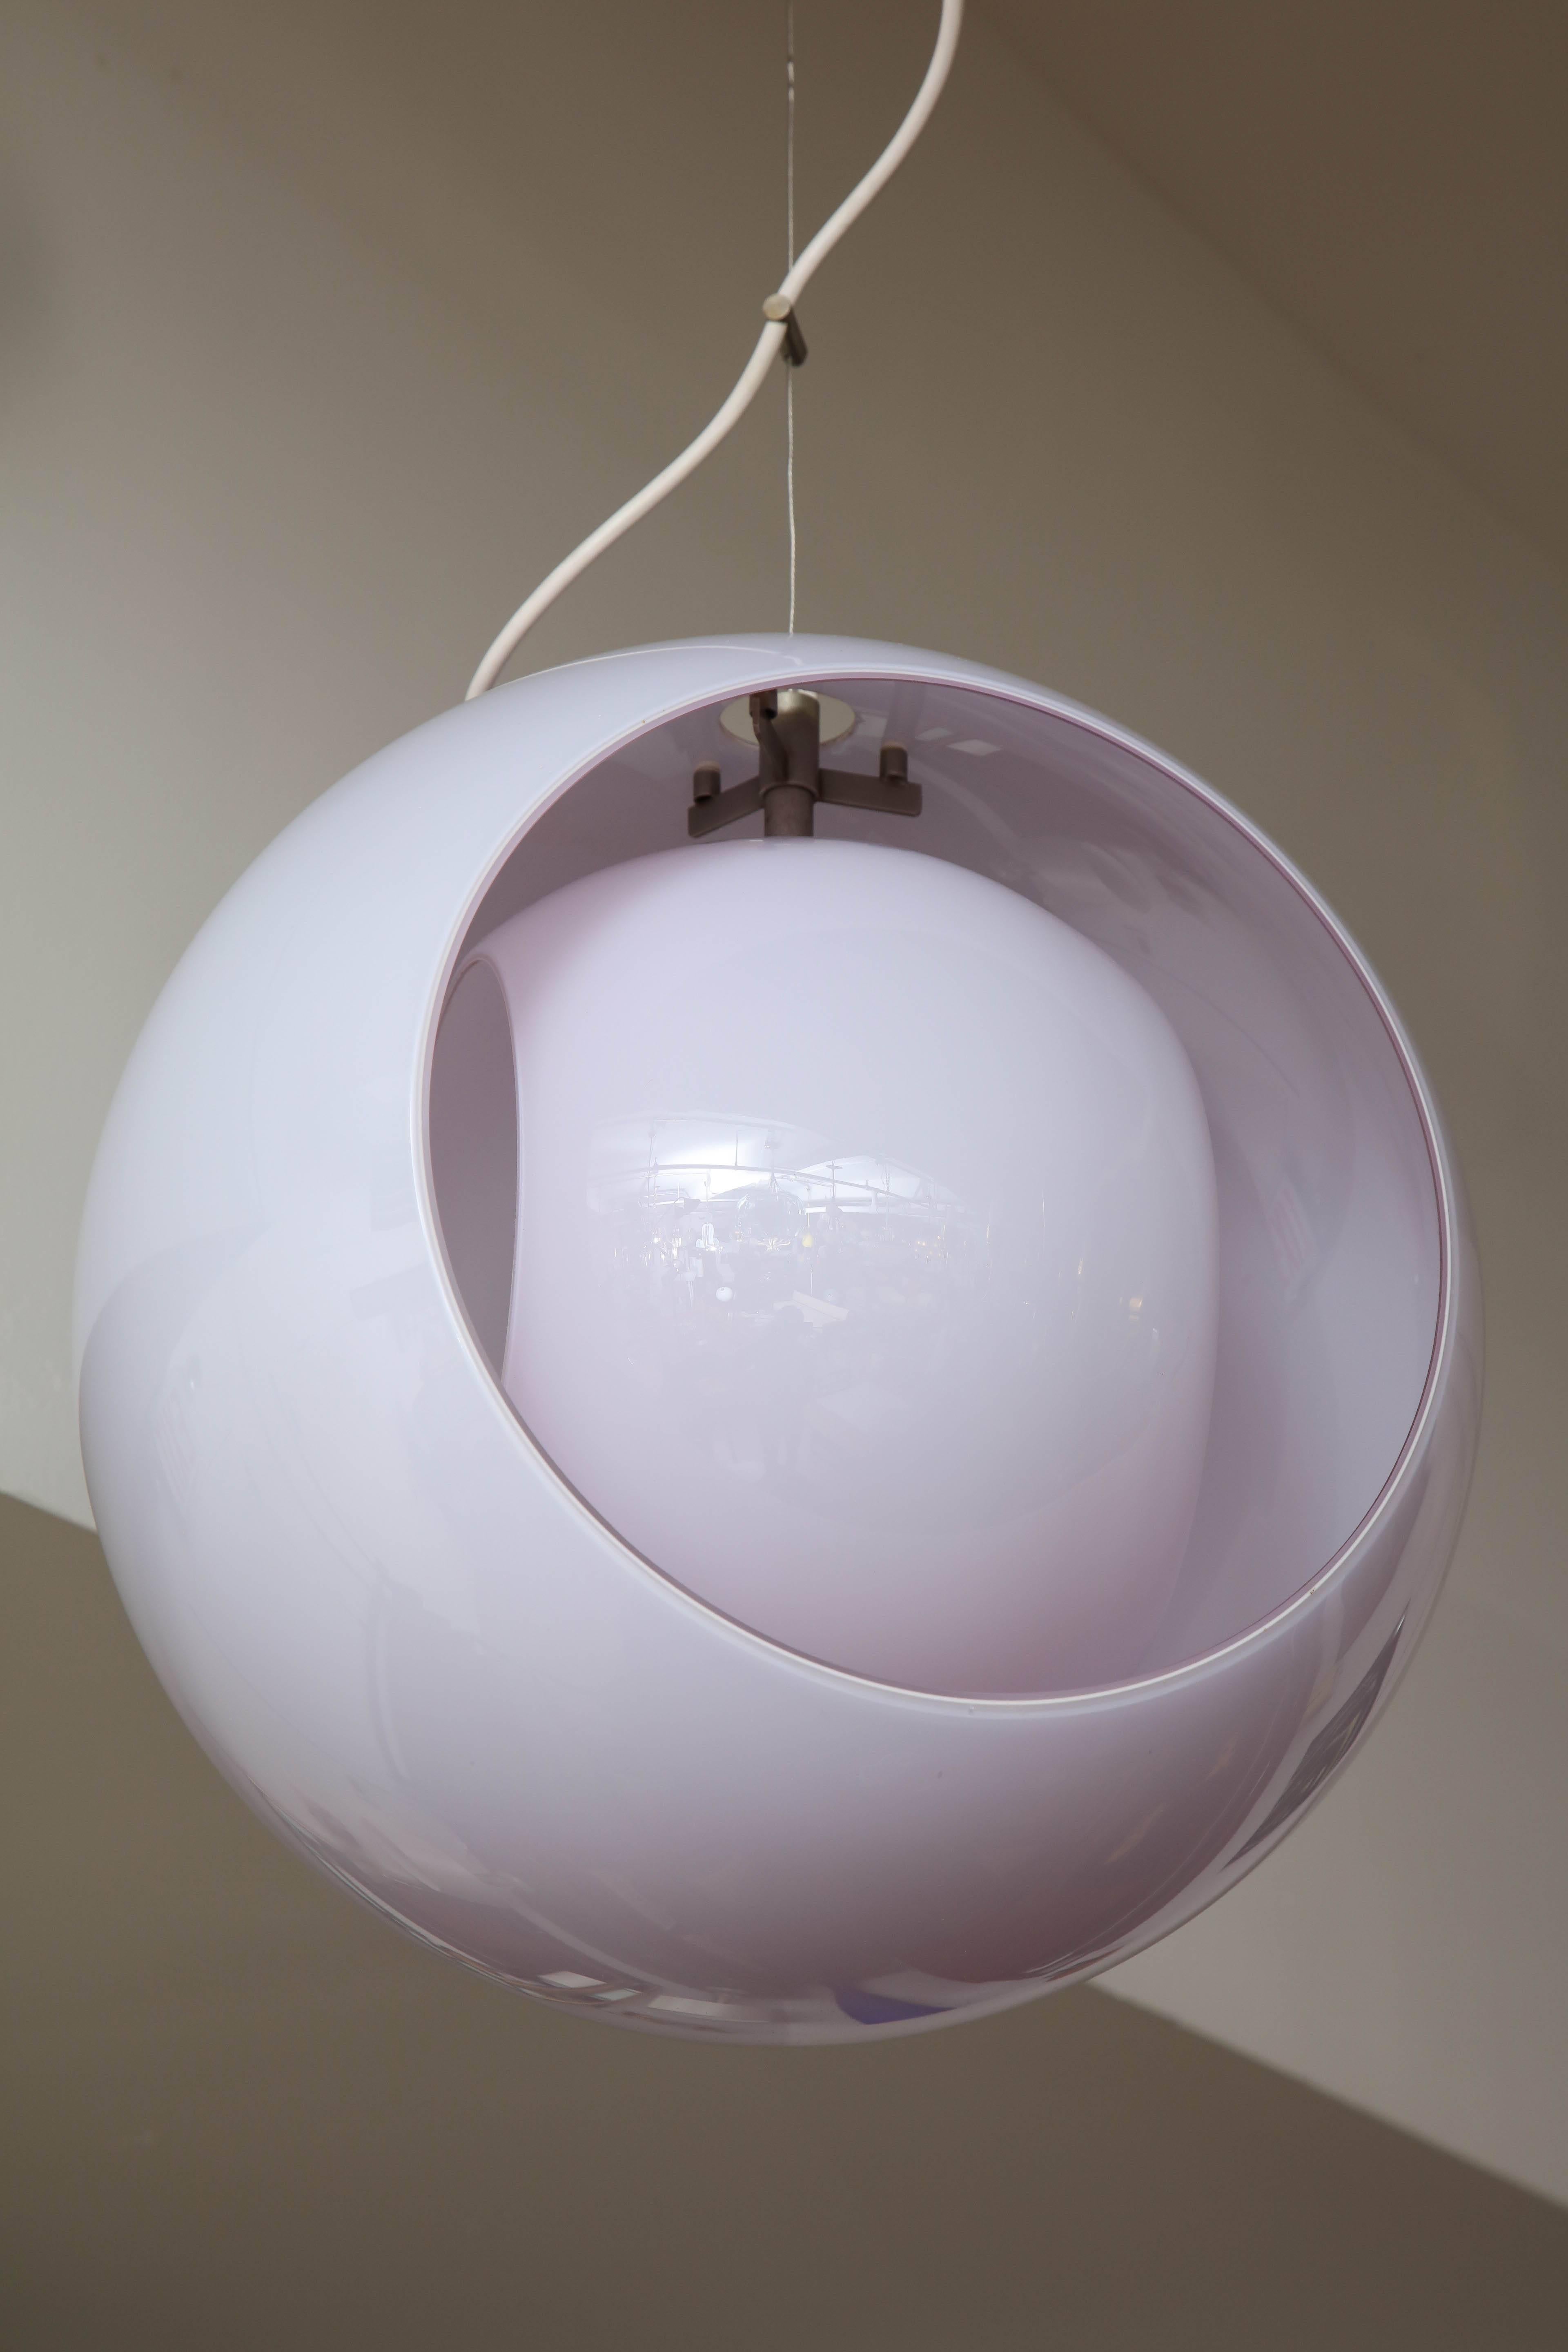 Modernest pendant light designed by Gino Vistosi in a mauve color cased glass, inner glass shade turns so that you can change the bulb with ease. Made in Venice in 1960.
Unfortunately the color in the photo doesn't do it justice, as you can see from